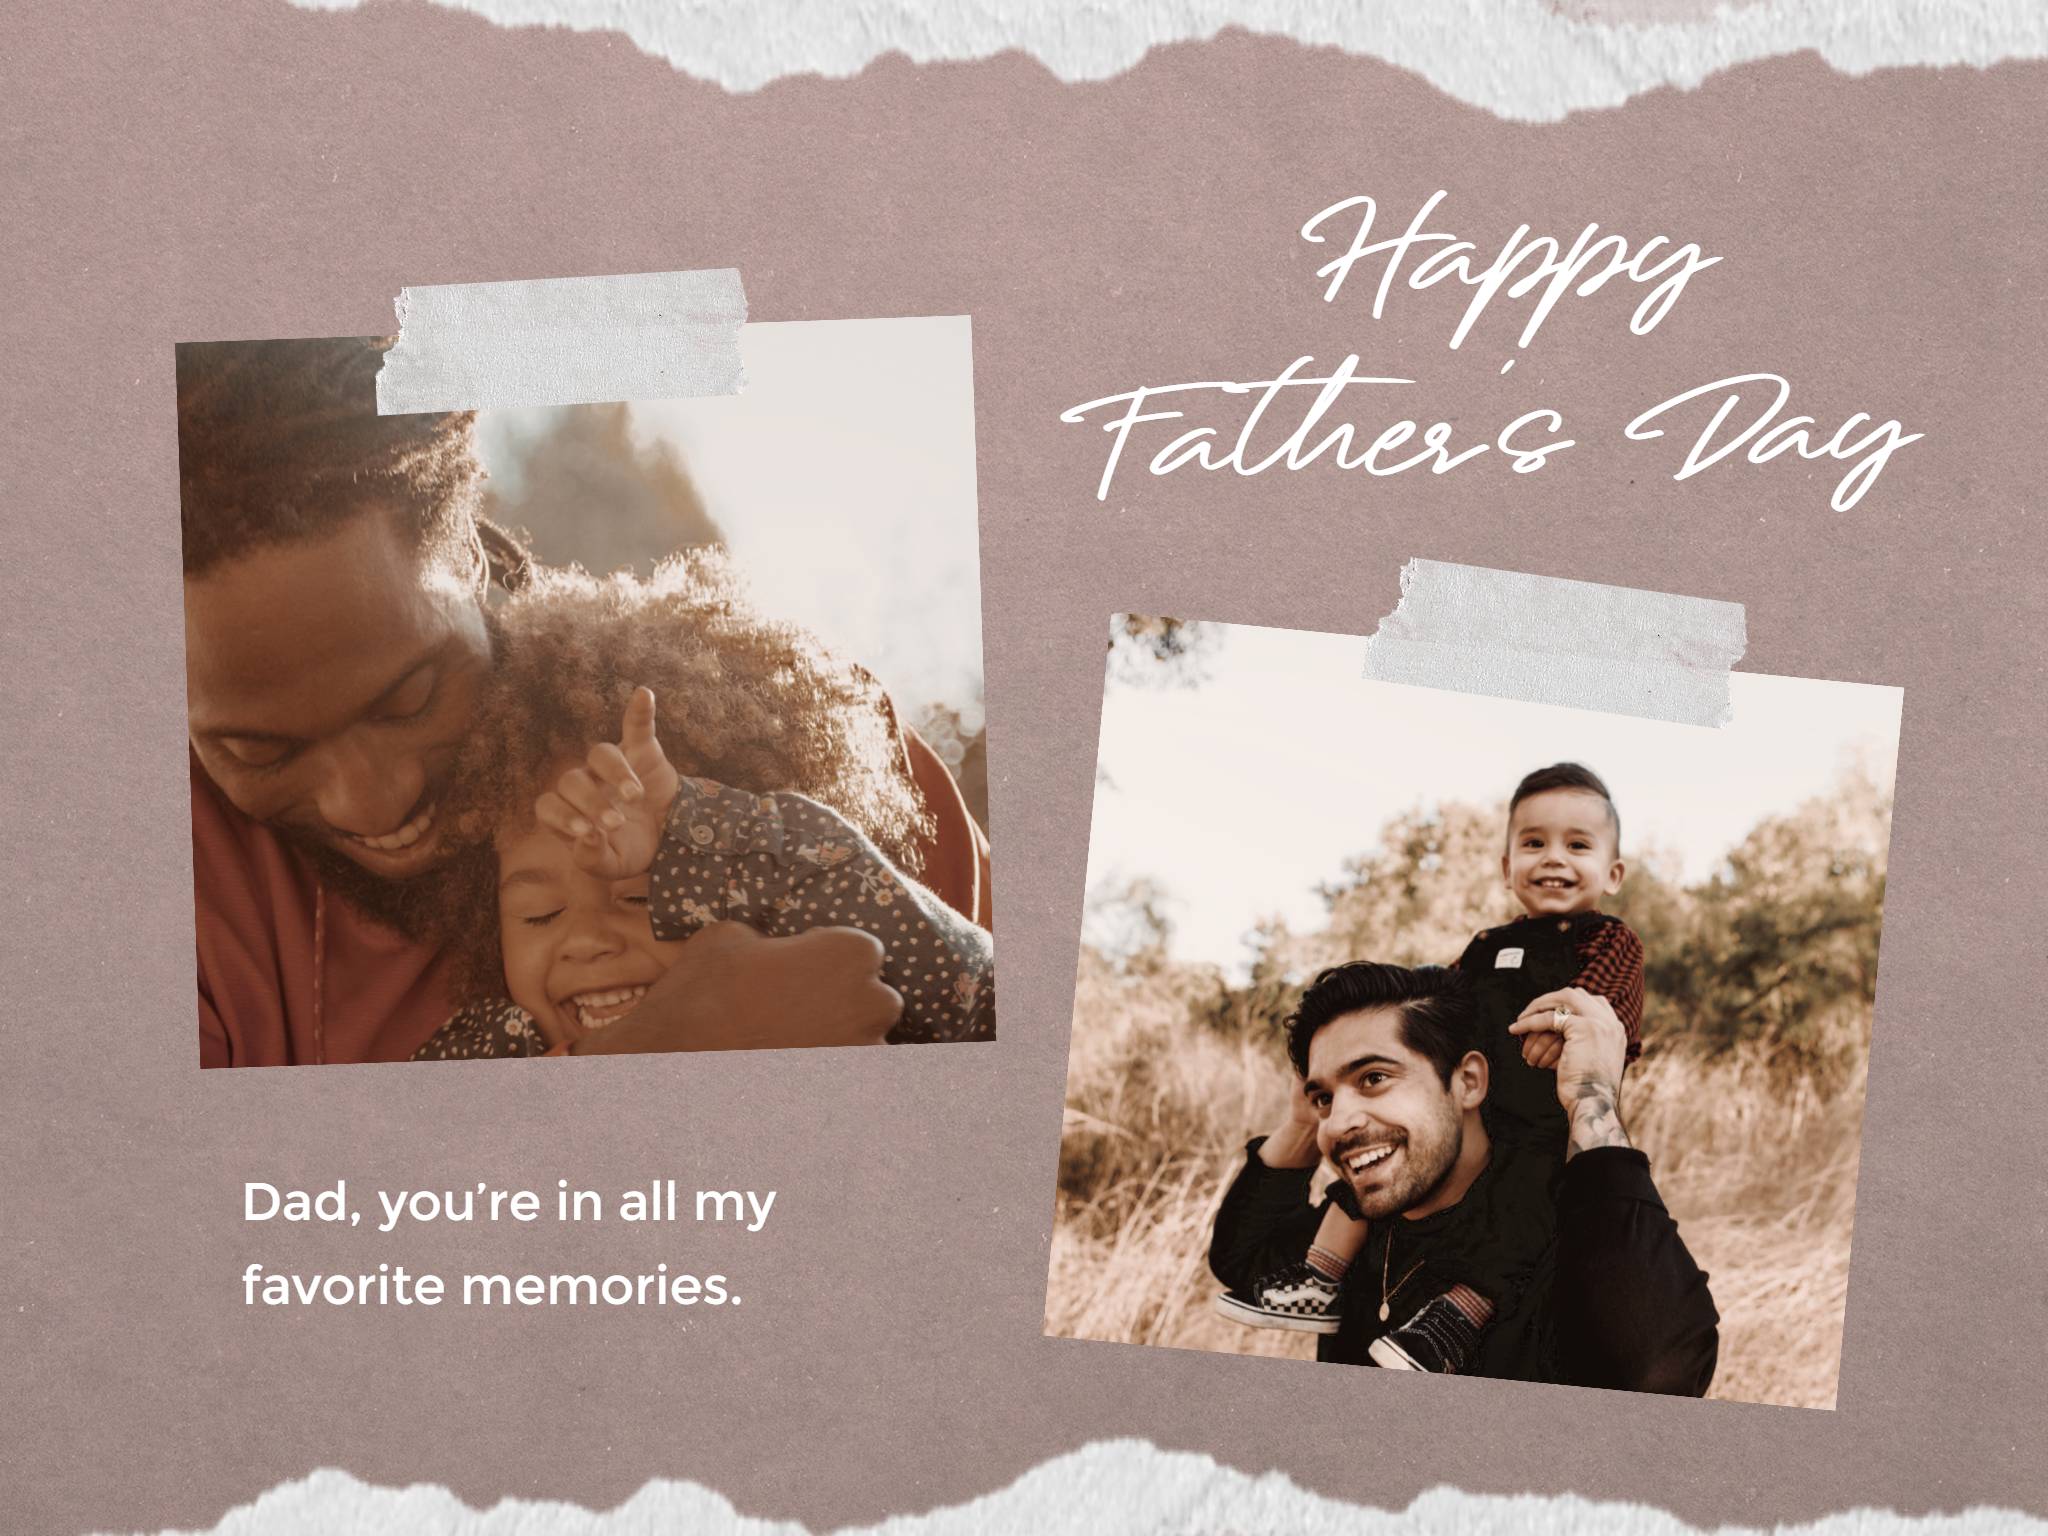 happy fathers day message card template of dad and son collage